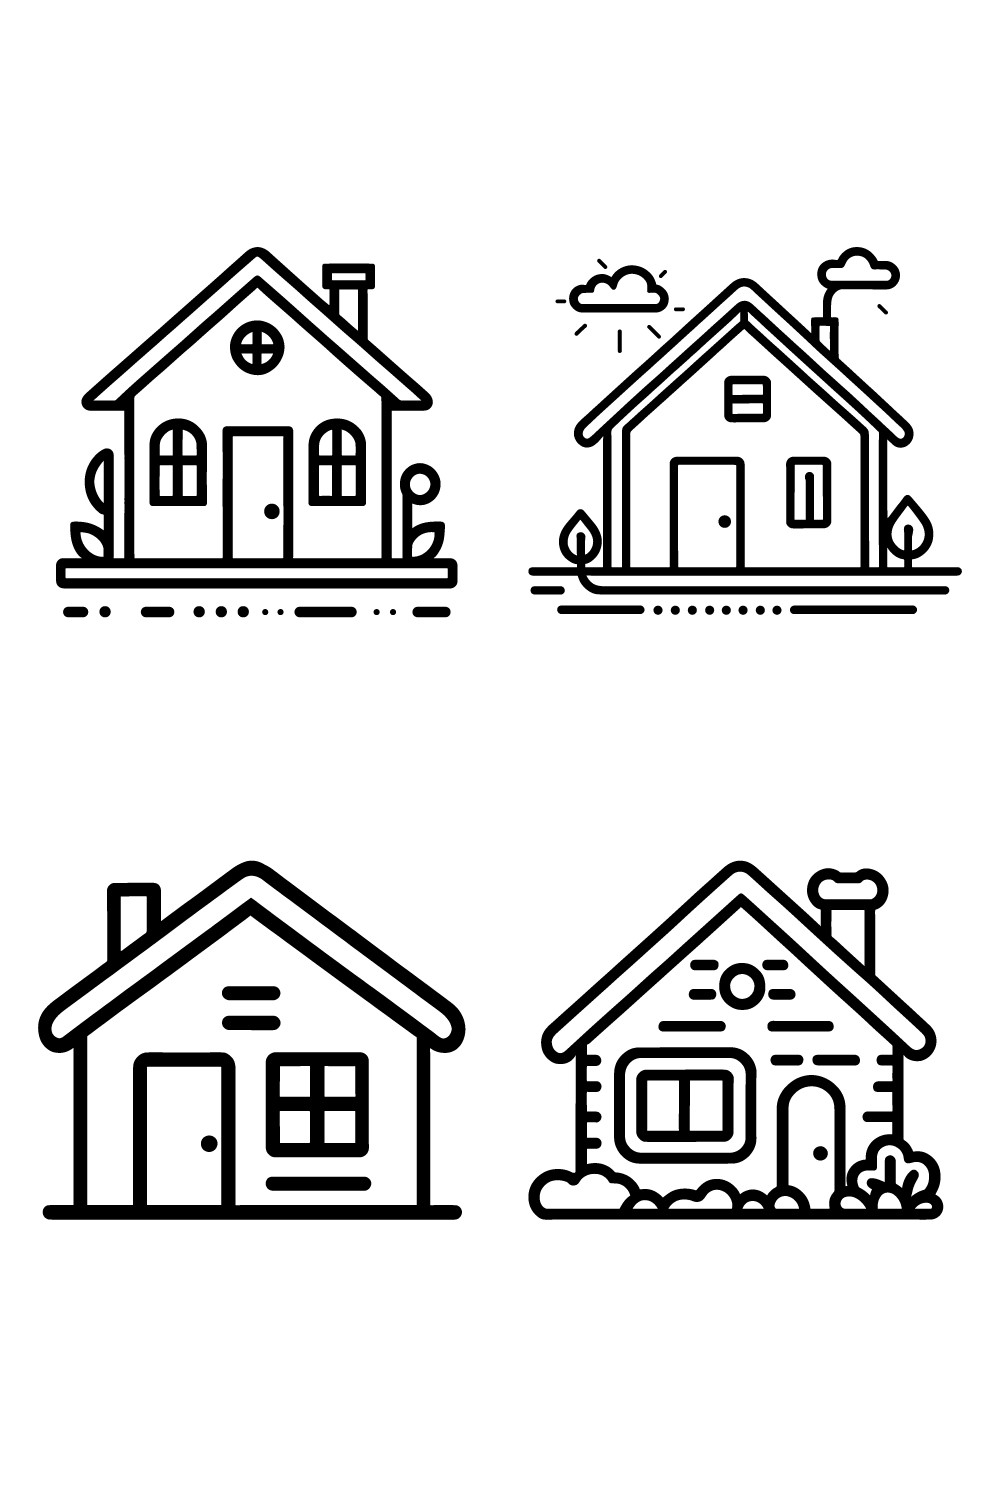 Home Icon set, Illustration of house icons, Black and white house icons, Outline Style, Home line art icons, and clean simple design pinterest preview image.